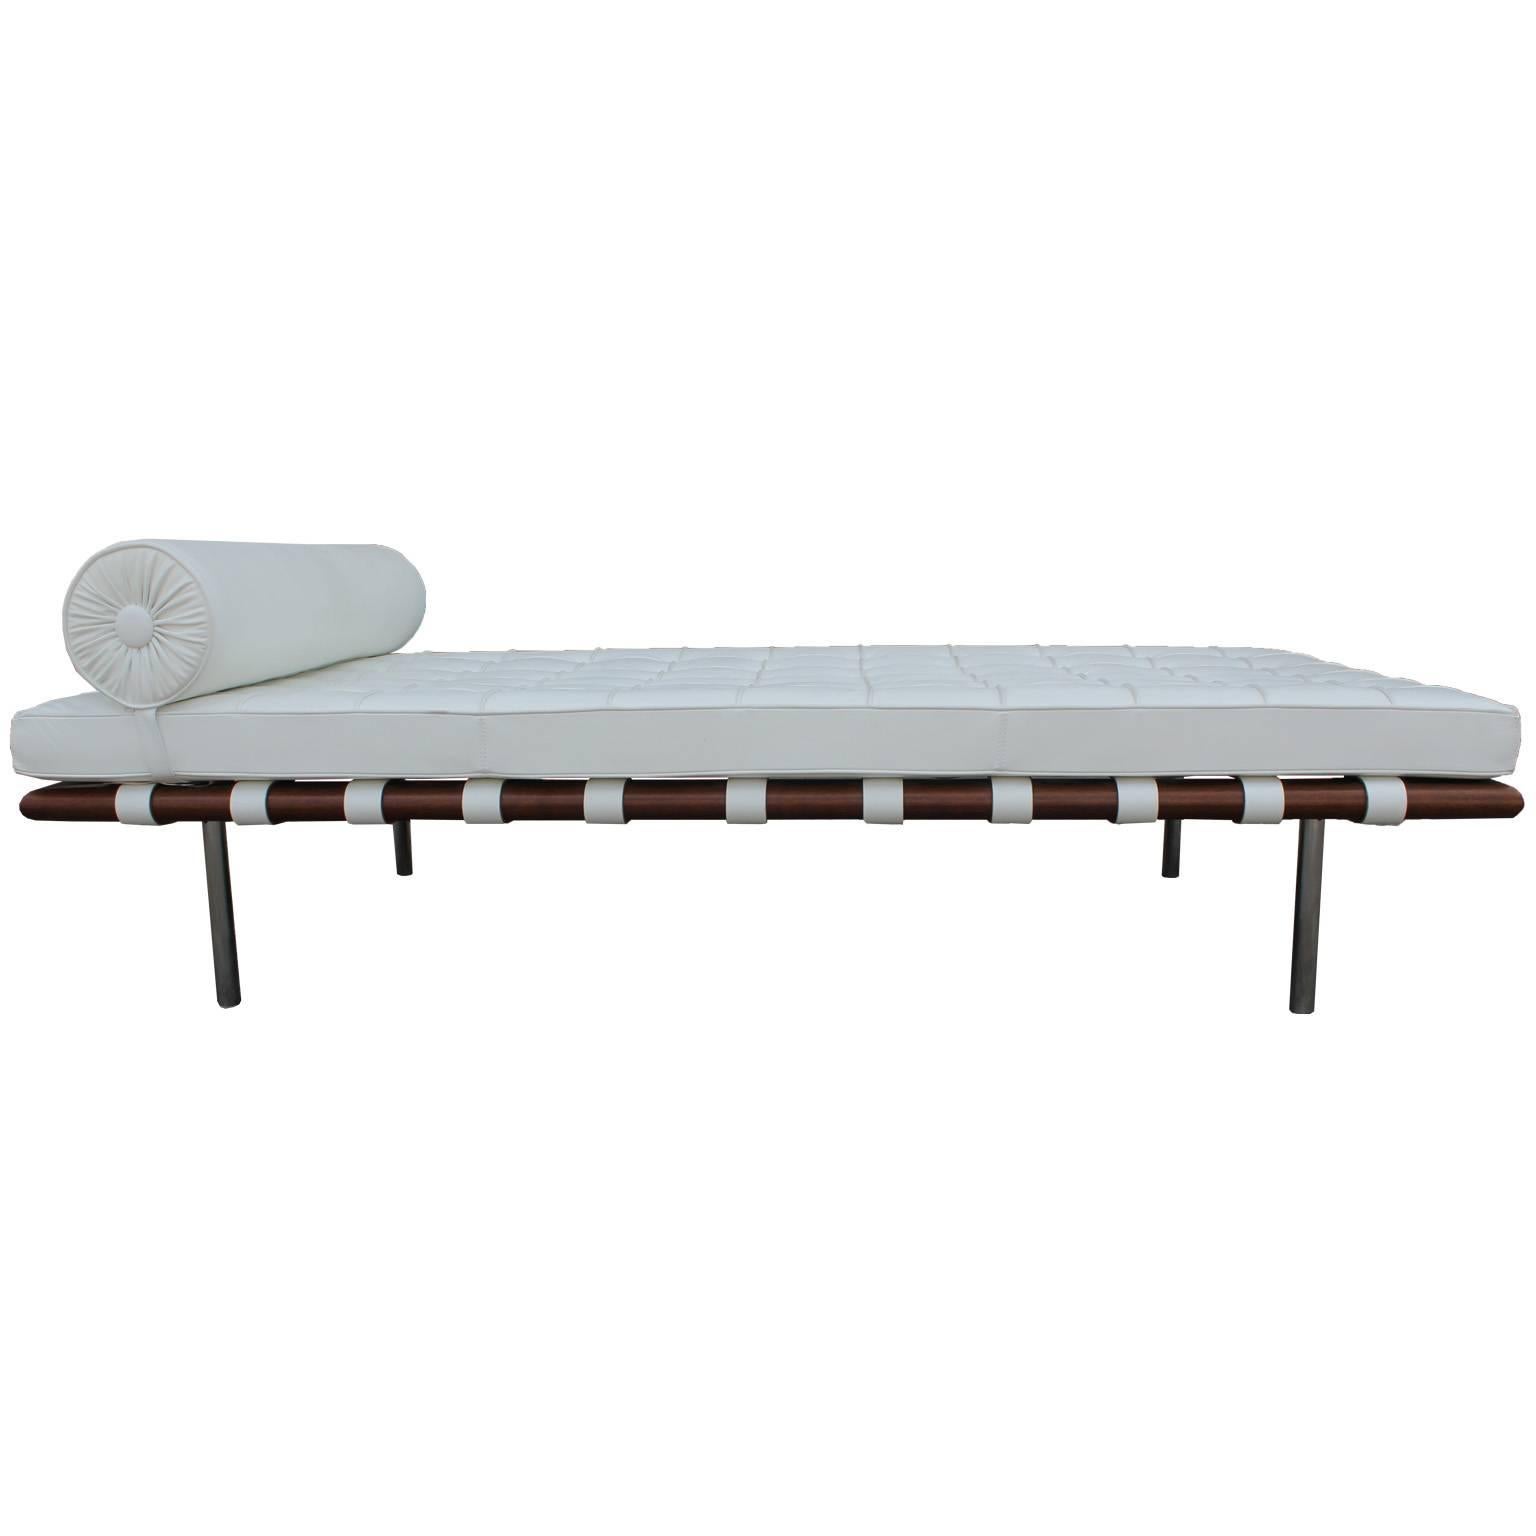 The iconic Barcelona daybed designed by Ludwig Mies van der Rohe and made by Knoll. Daybed is upholstered in a luxe creamy white leather. Leather is in overall good condition. Chrome frames are in excellent shape. Inquire for matching lounge chairs.